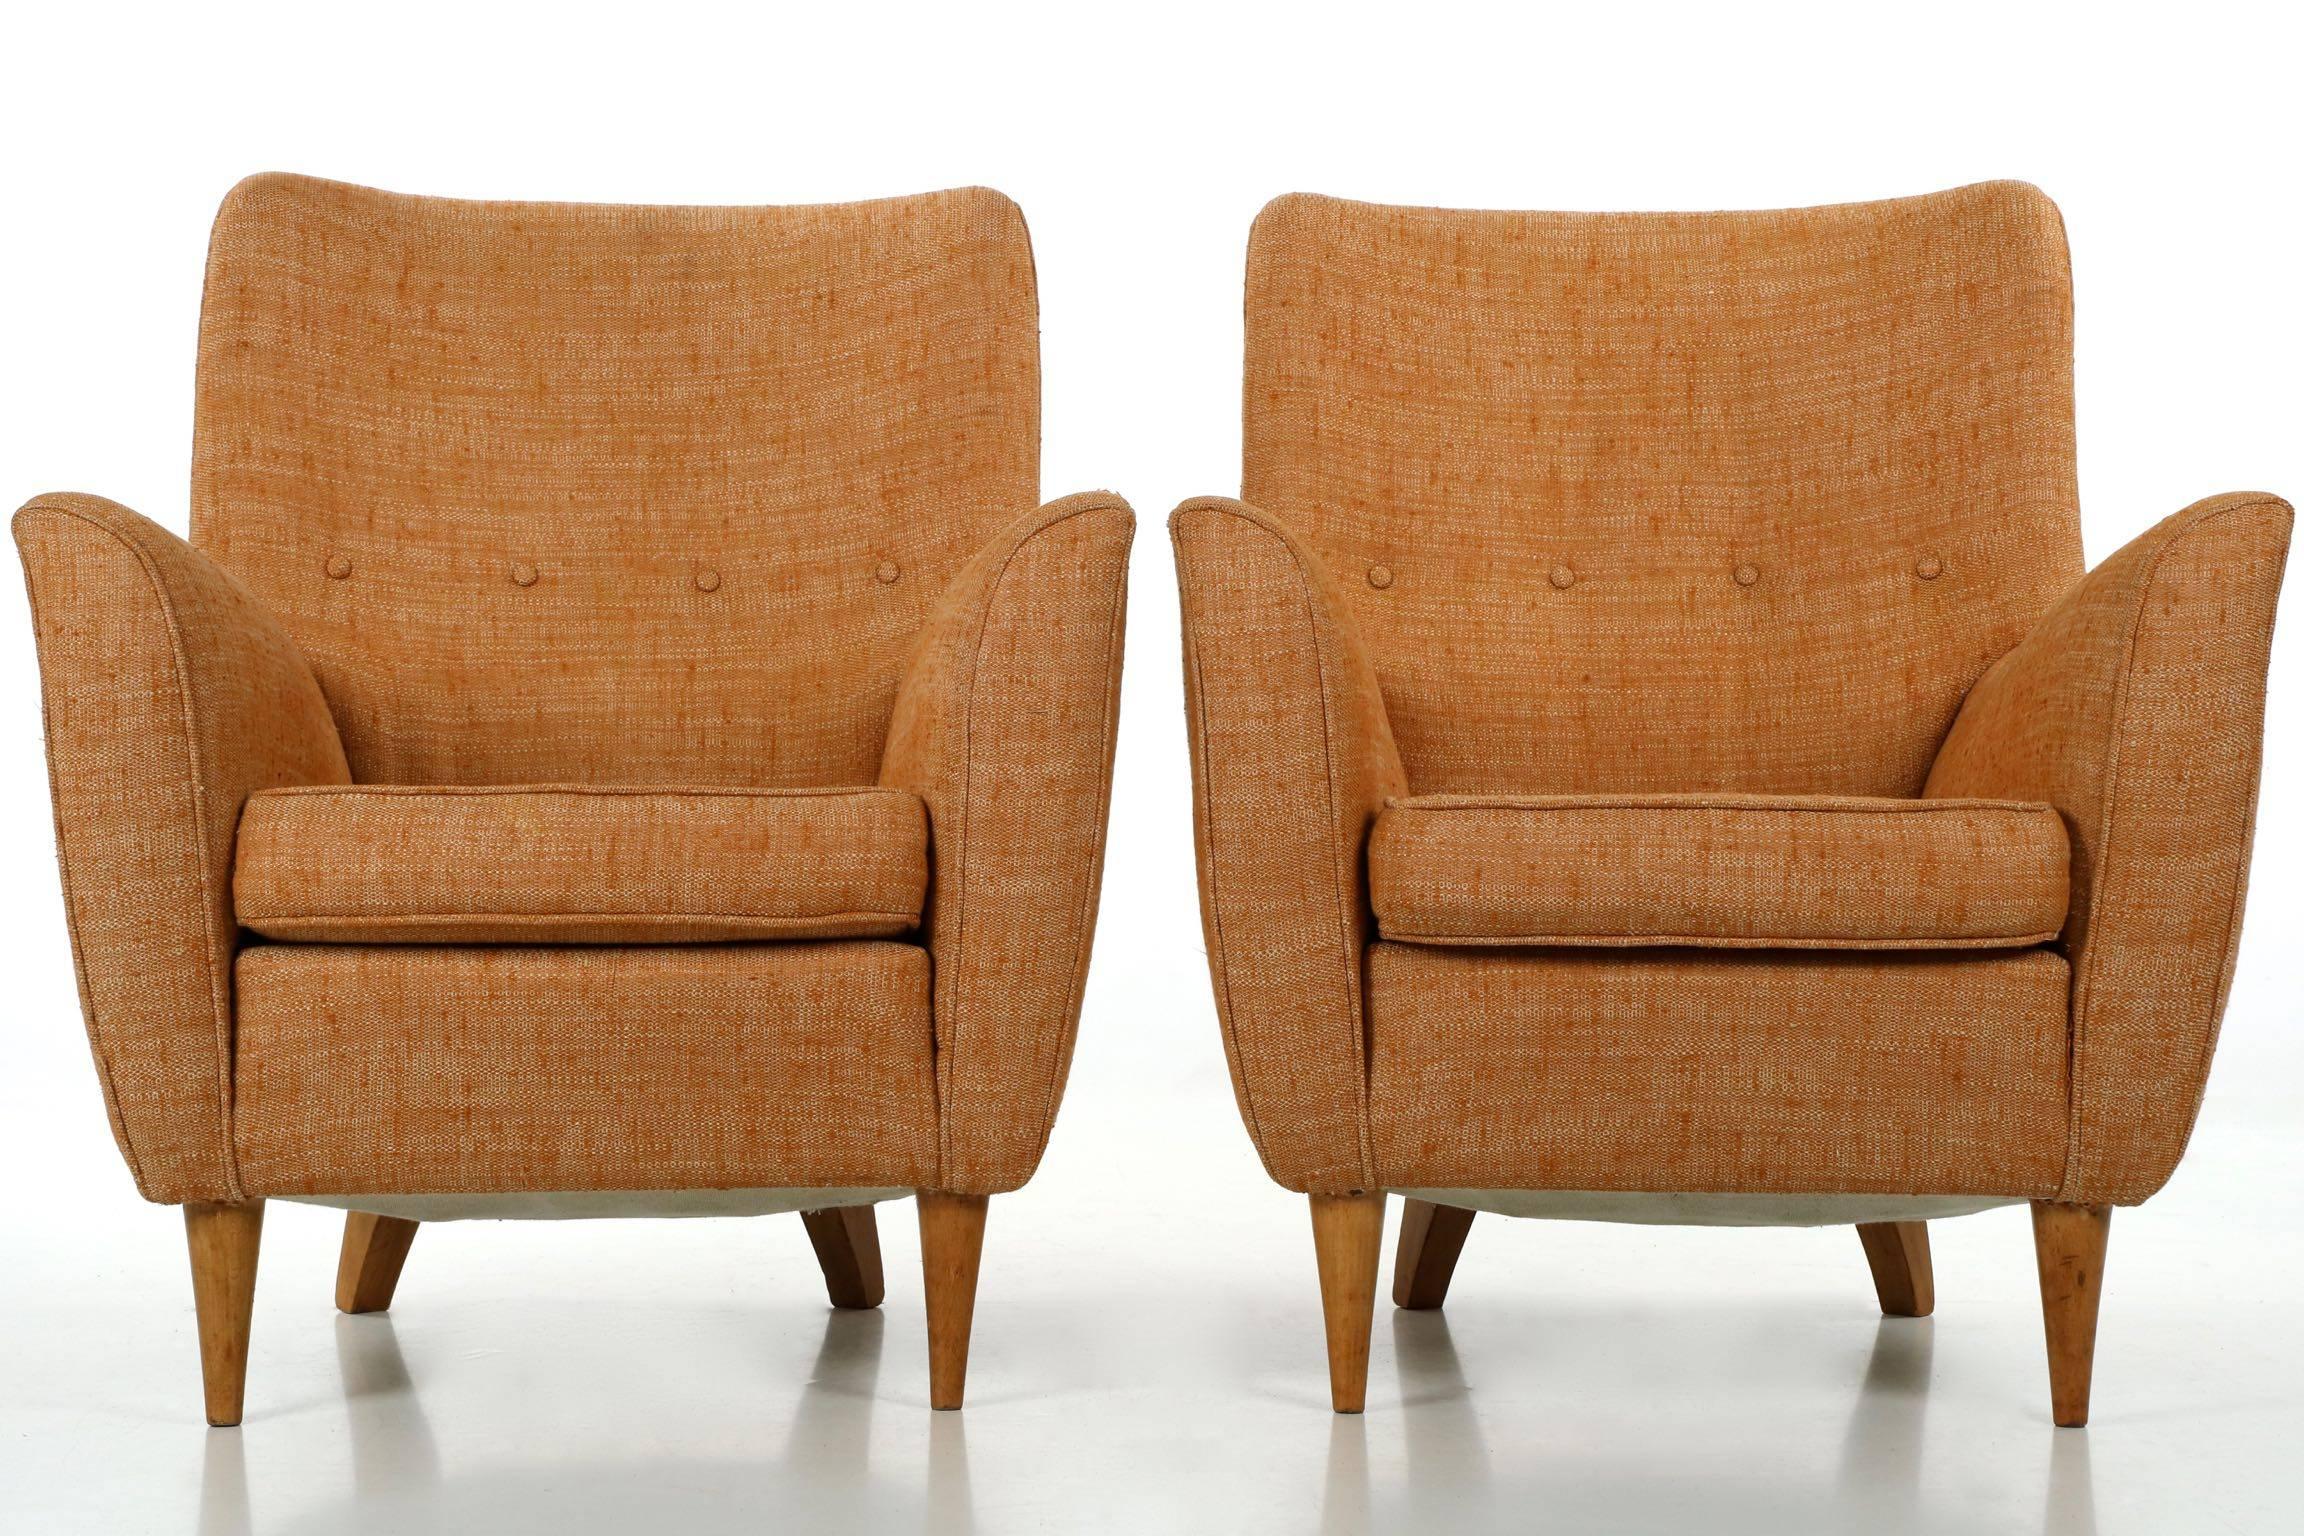 An absolutely gorgeous form in this pair of Italian sculpted beech club chairs, the bow of the back is matched in the subtle outward curvature of the arms despite being a club chair in design, the footprint is petite and visually reduced by the